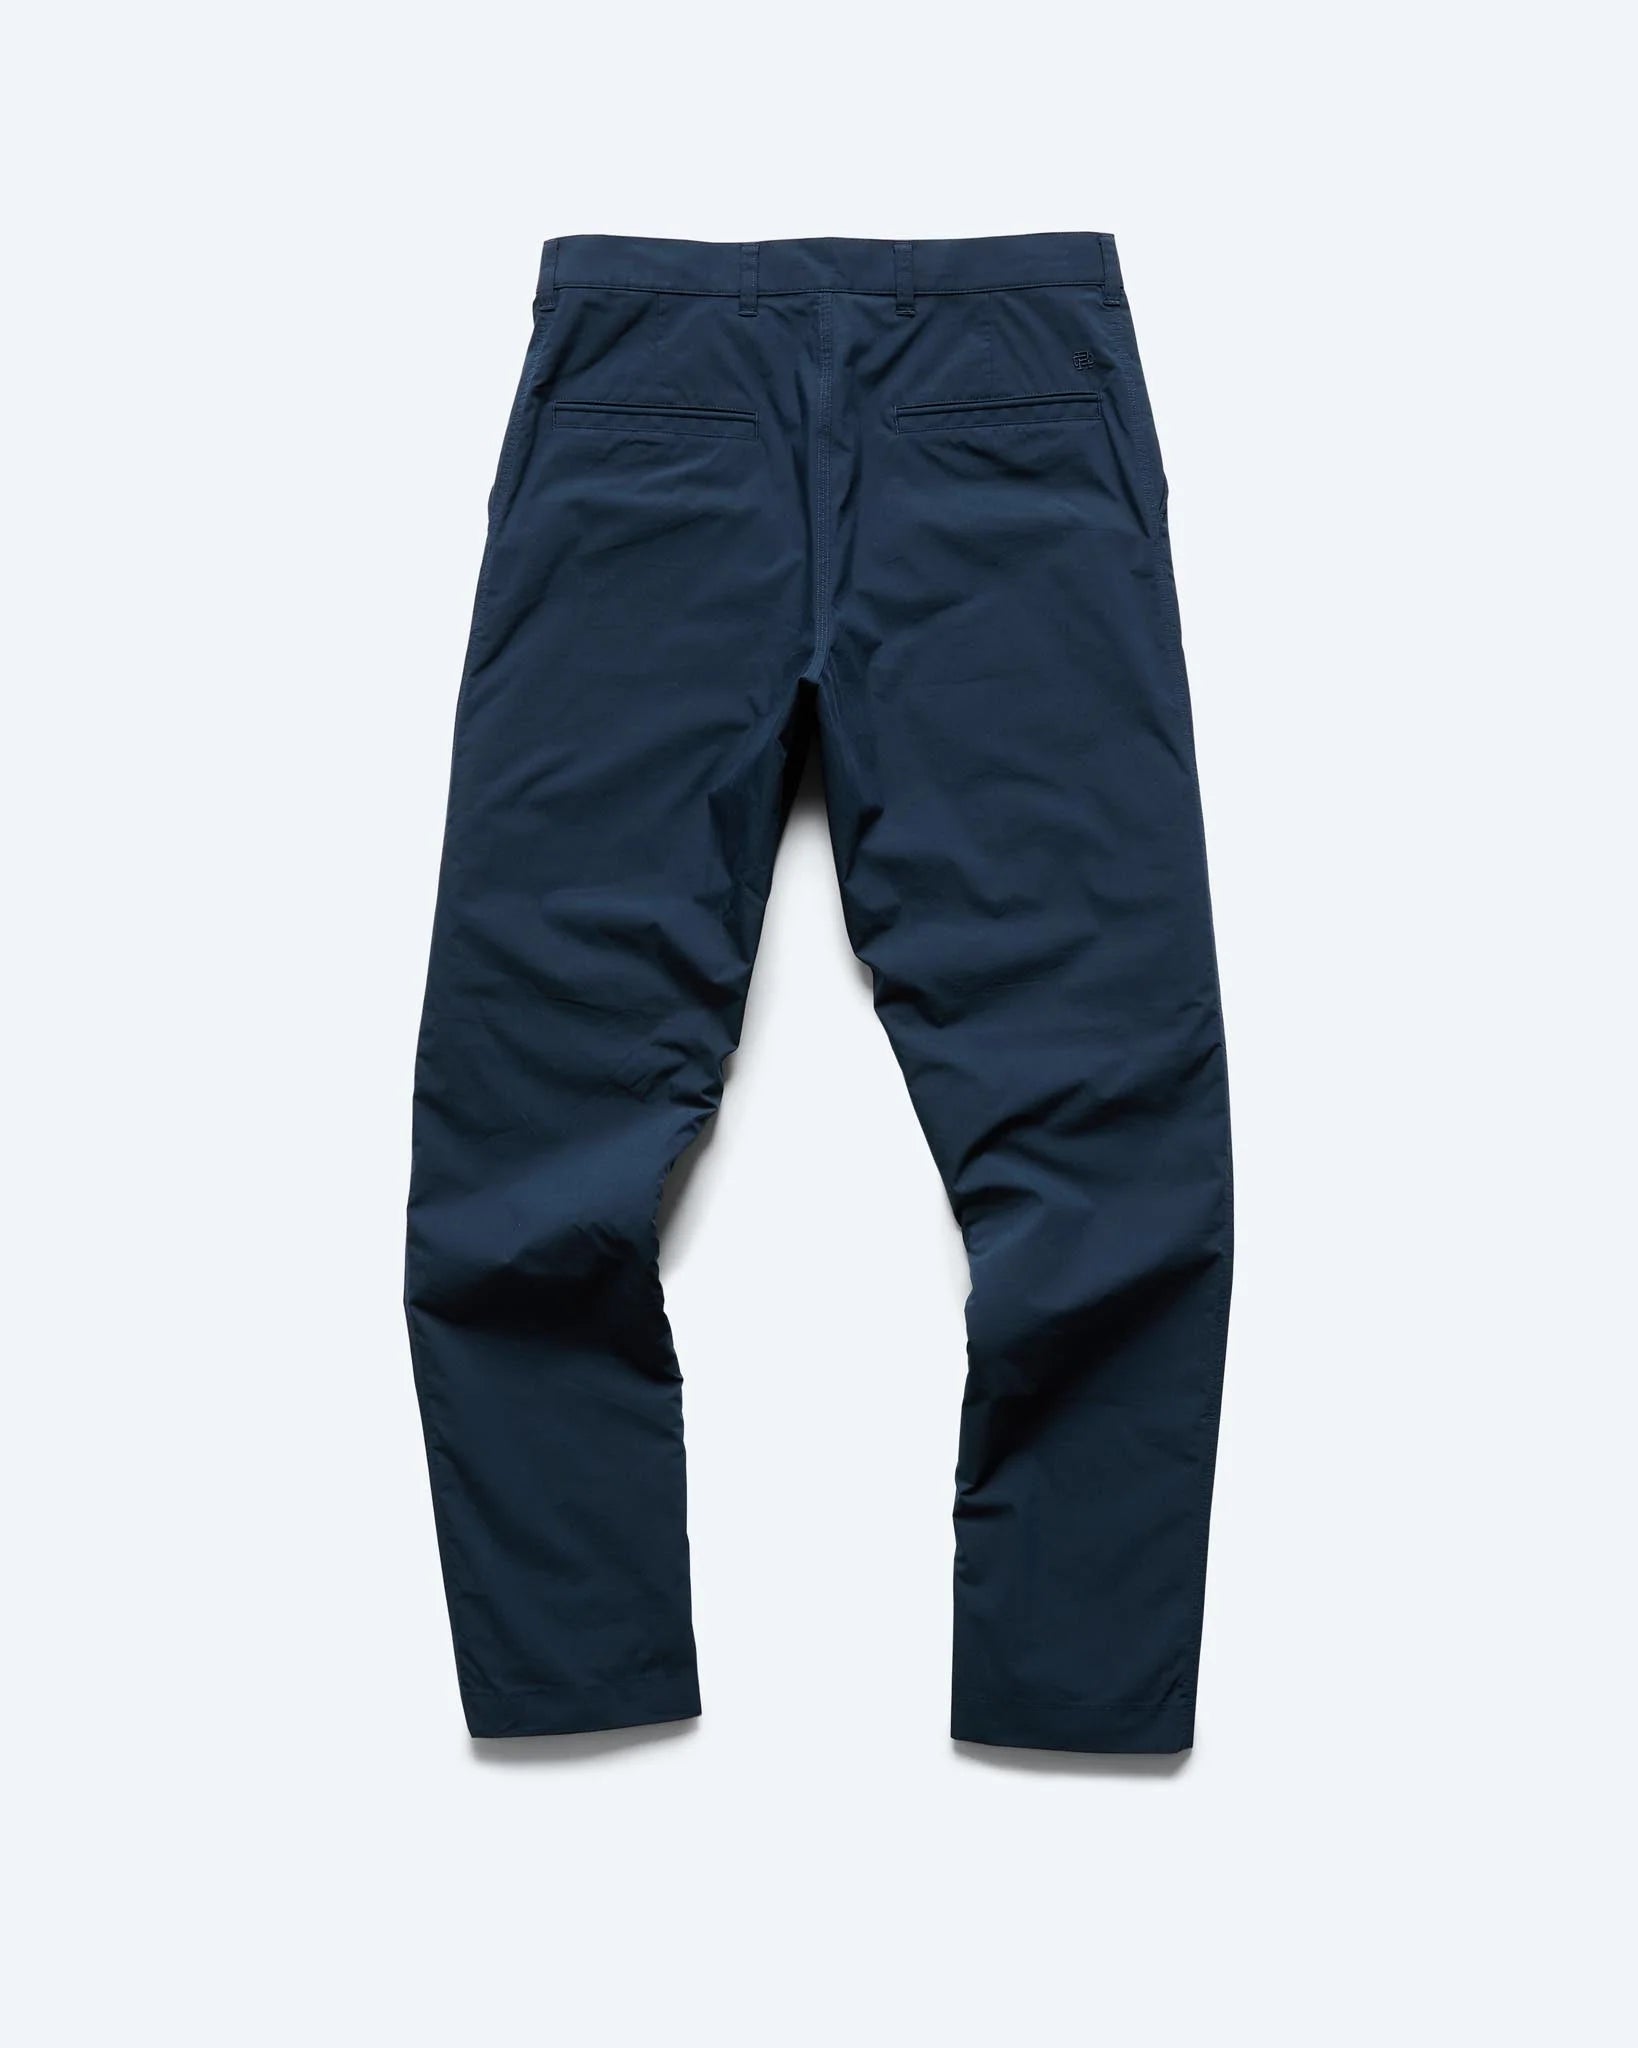 Reigning Champ Solotex Cotton Freshman Pant in Navy